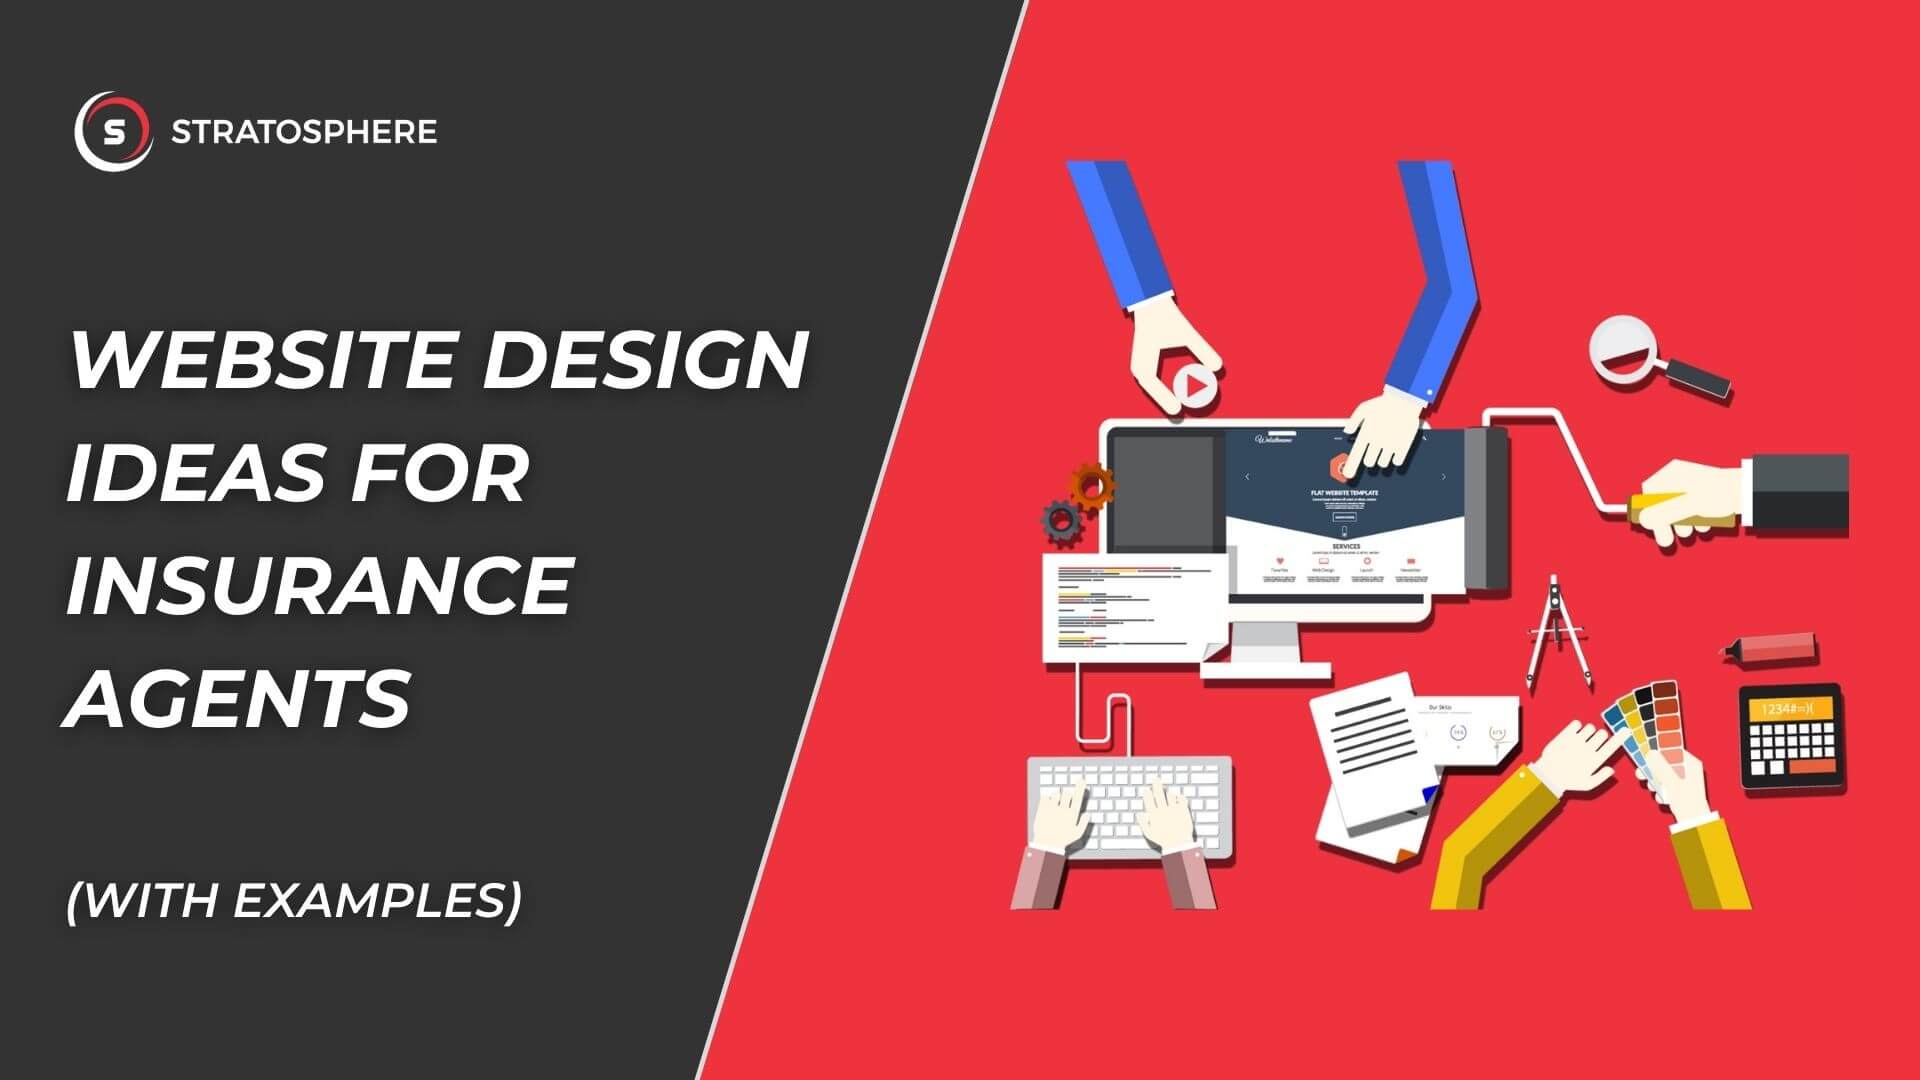 11 Website Design Ideas for Insurance Agents [with Examples]